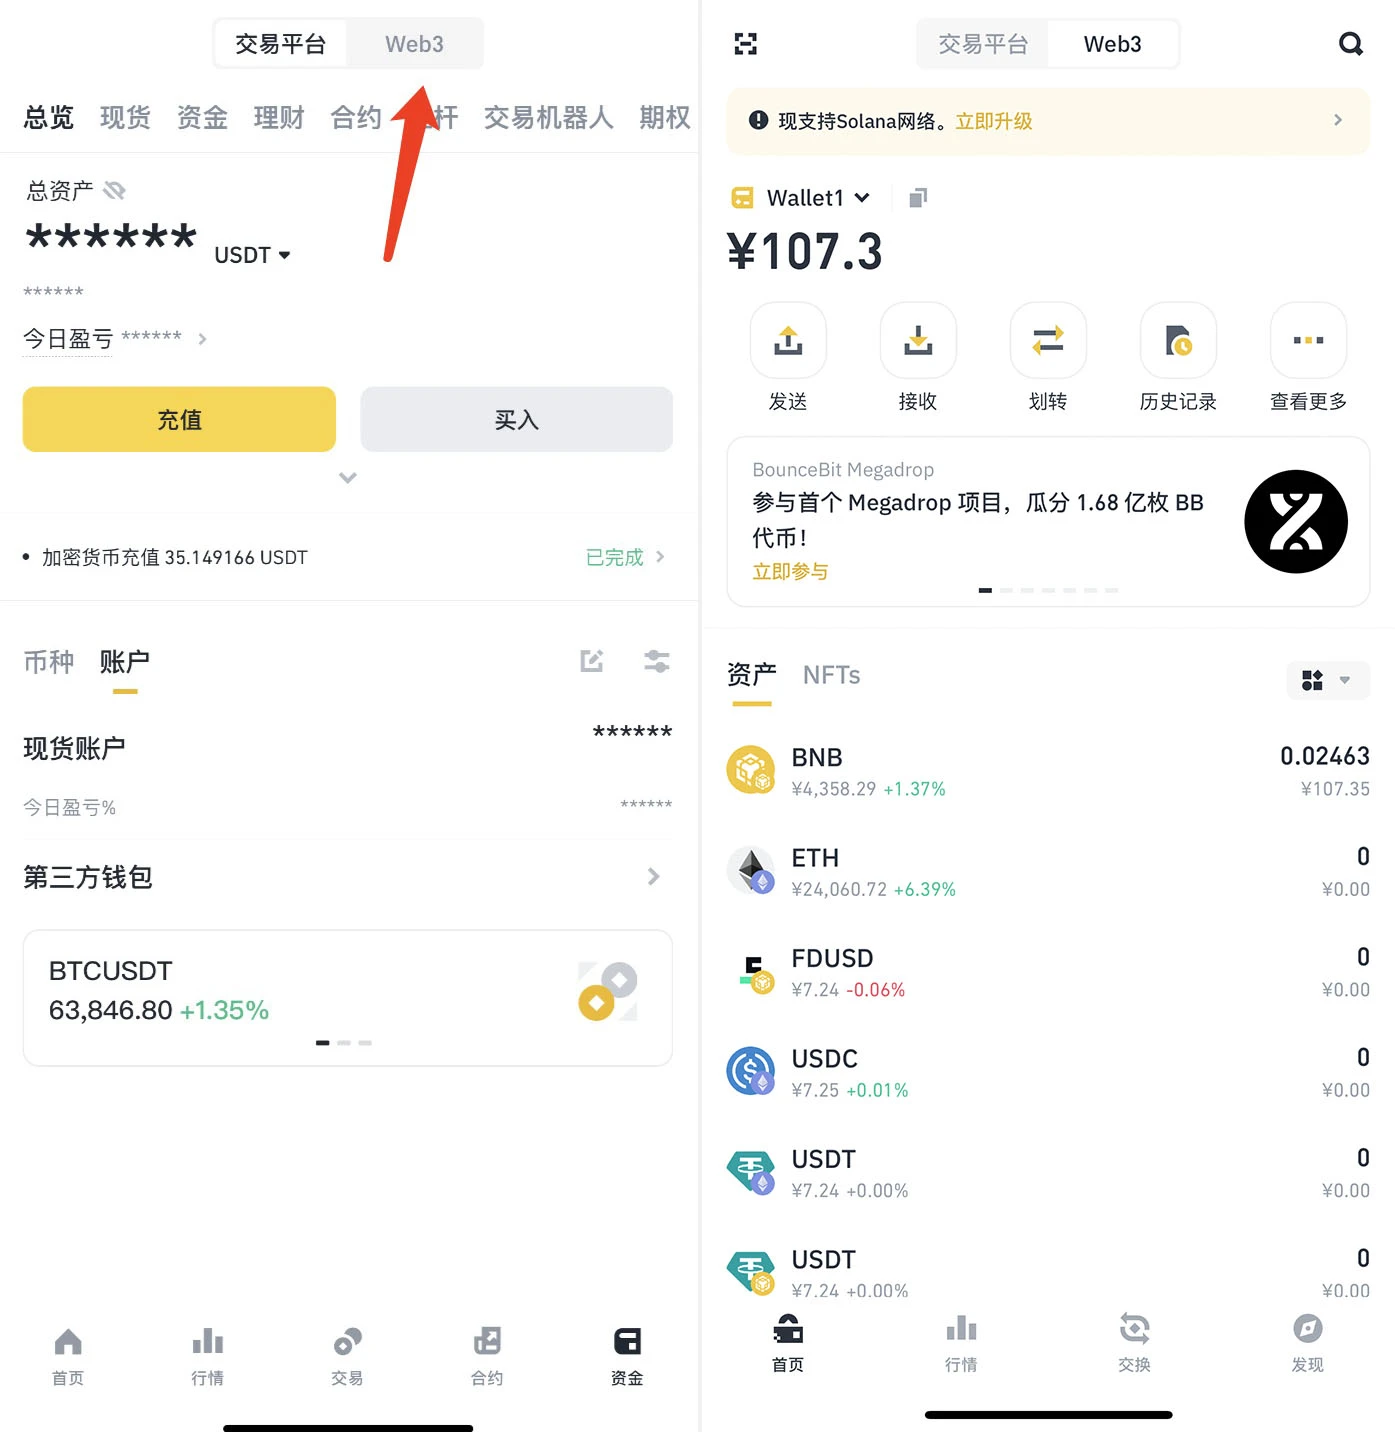 Over 57,000 users participated in two days. Detailed explanation of Binance Megadrops first project BounceBit (with operation tutorial)